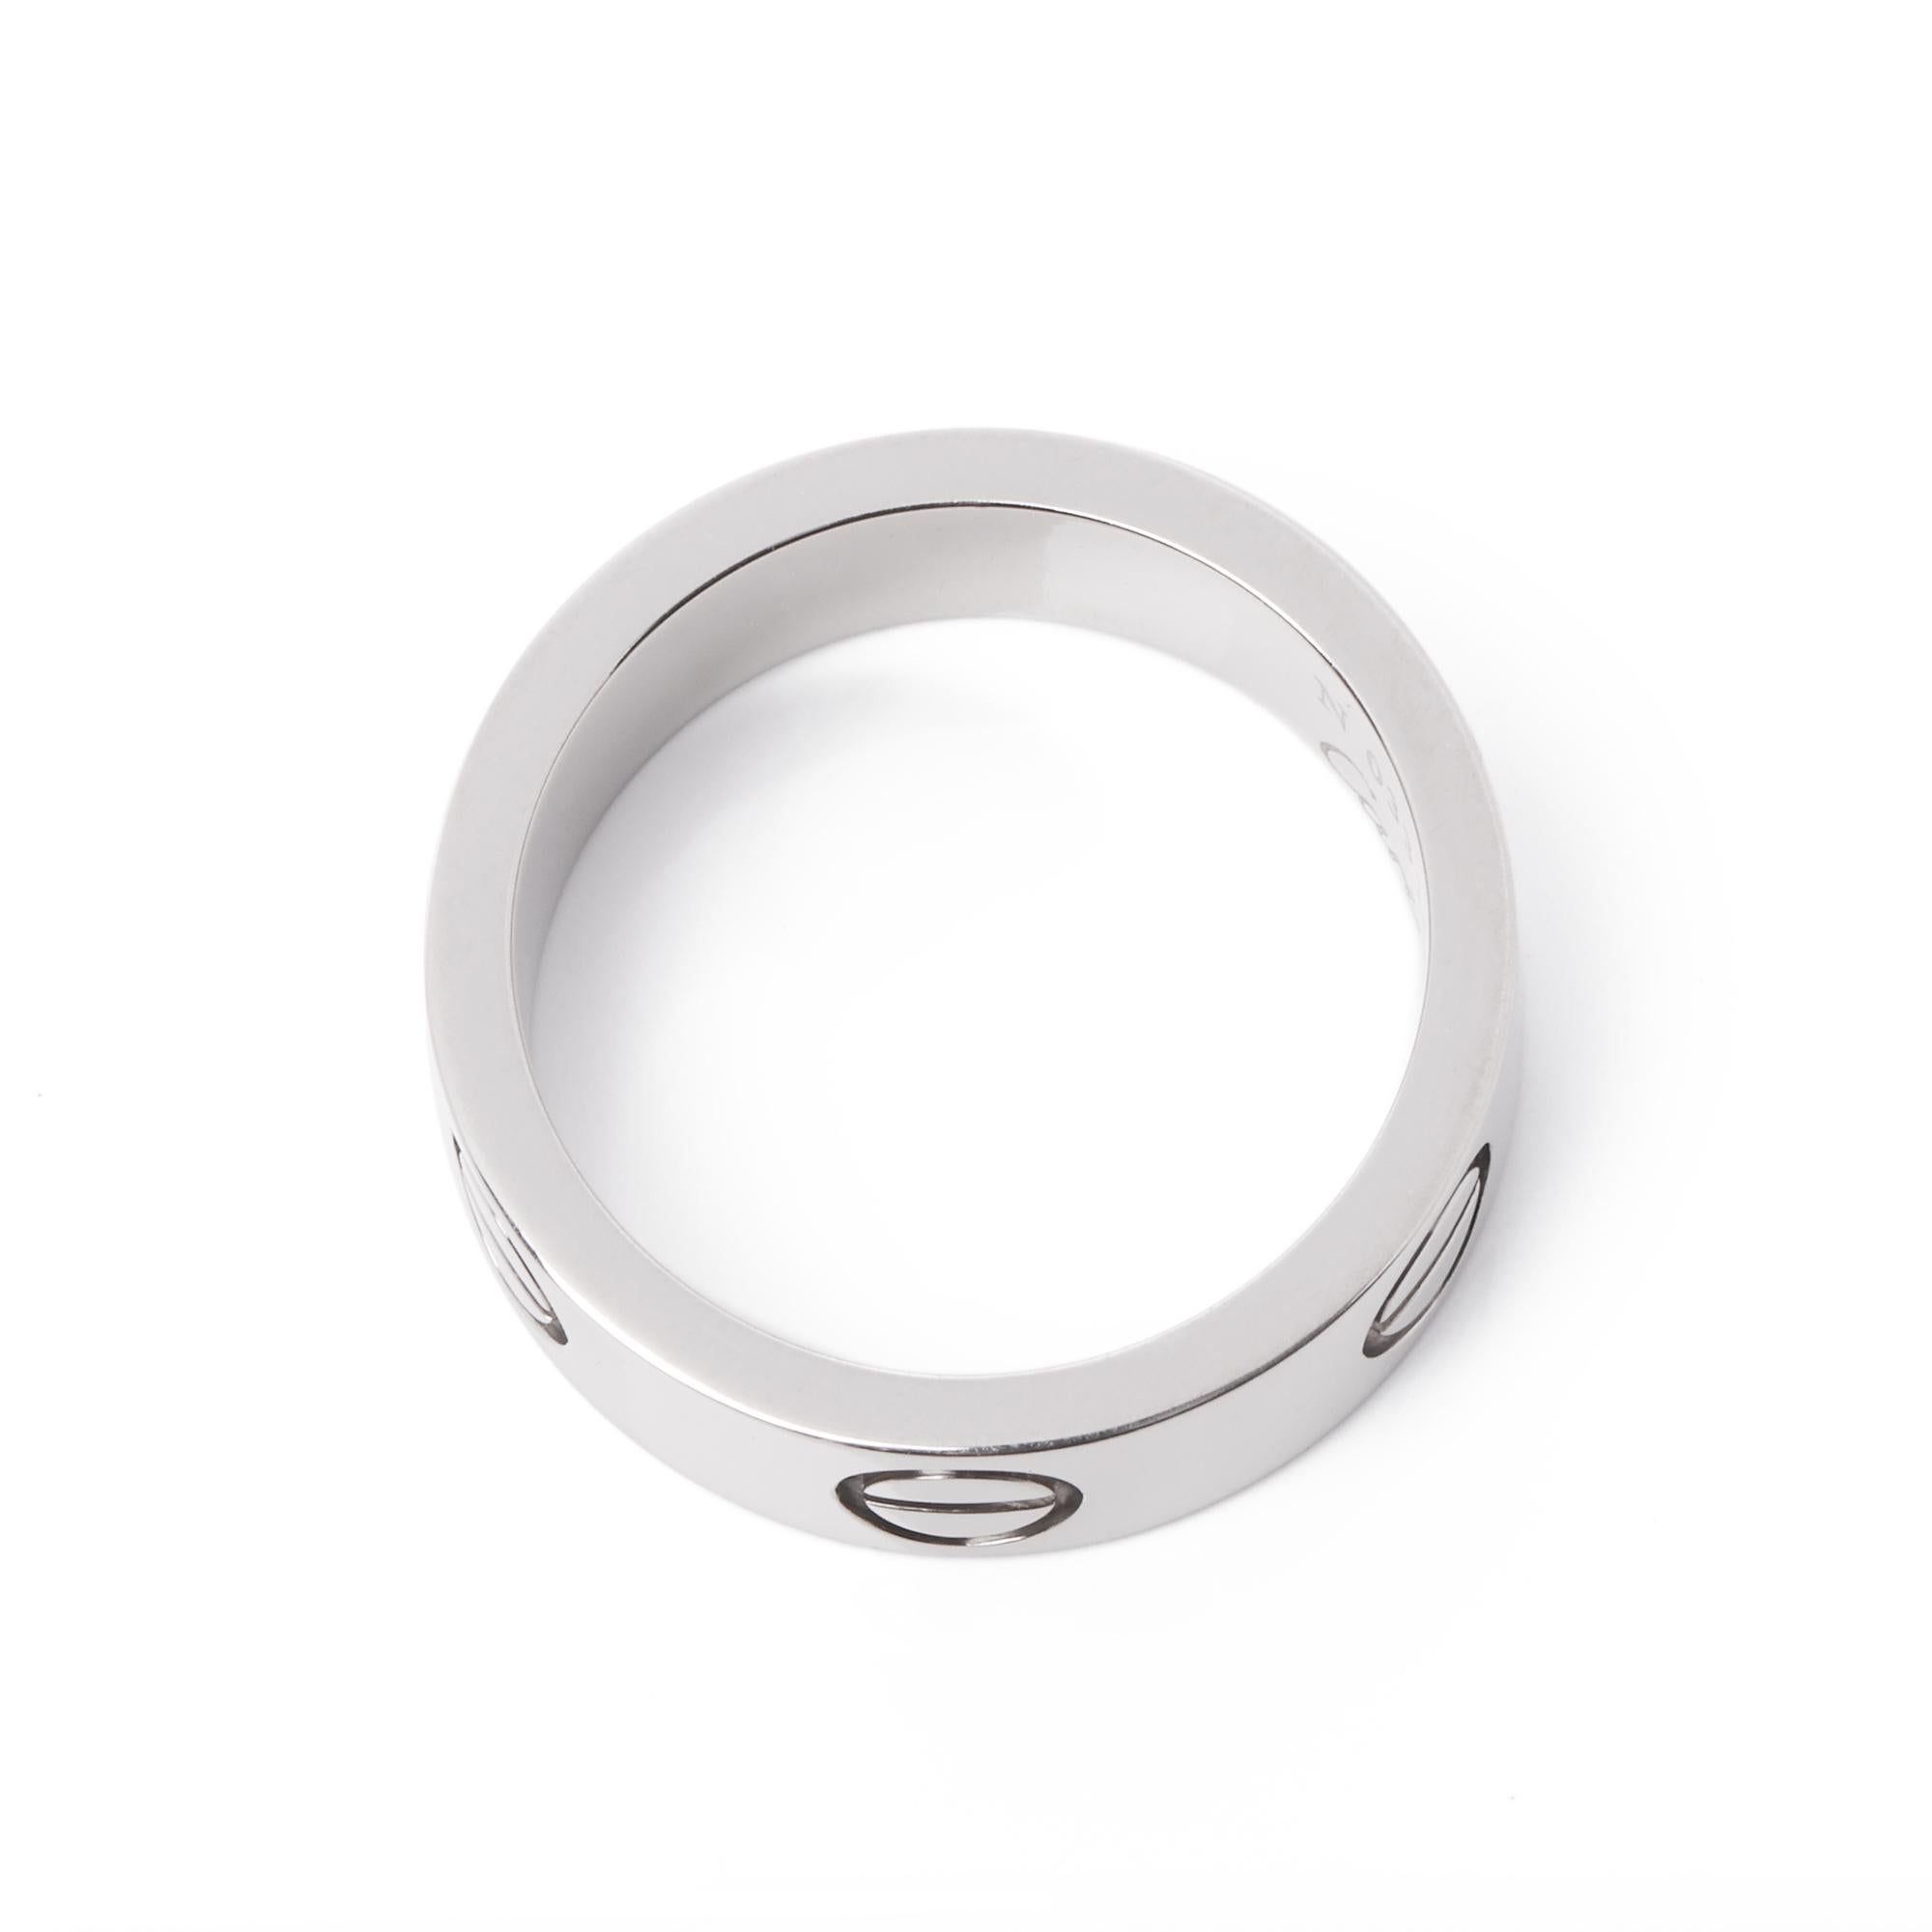 Cartier 18ct White Gold Love Band Ring

Brand Cartier
Model Love Band Ring
Product Type Ring
Serial Number N0****
Material(s) 18ct White Gold
UK Ring Size H 1/2
EU Ring Size 47
US Ring Size 4
Resizing Possible No
Band Width 5.4mm
Total Weight